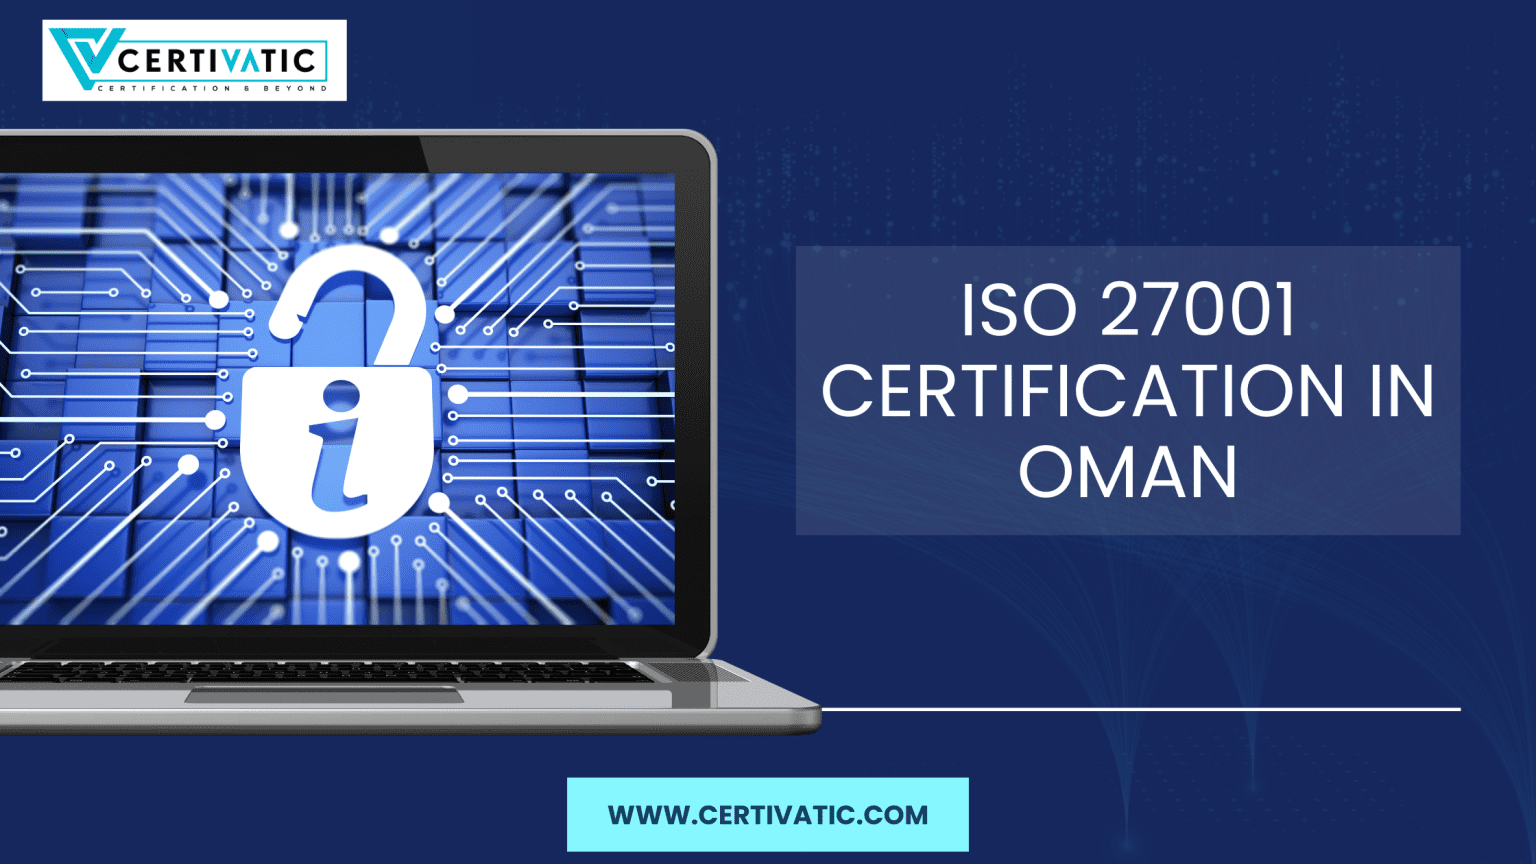 Challenges associated with ISO 27001 certification in Oman